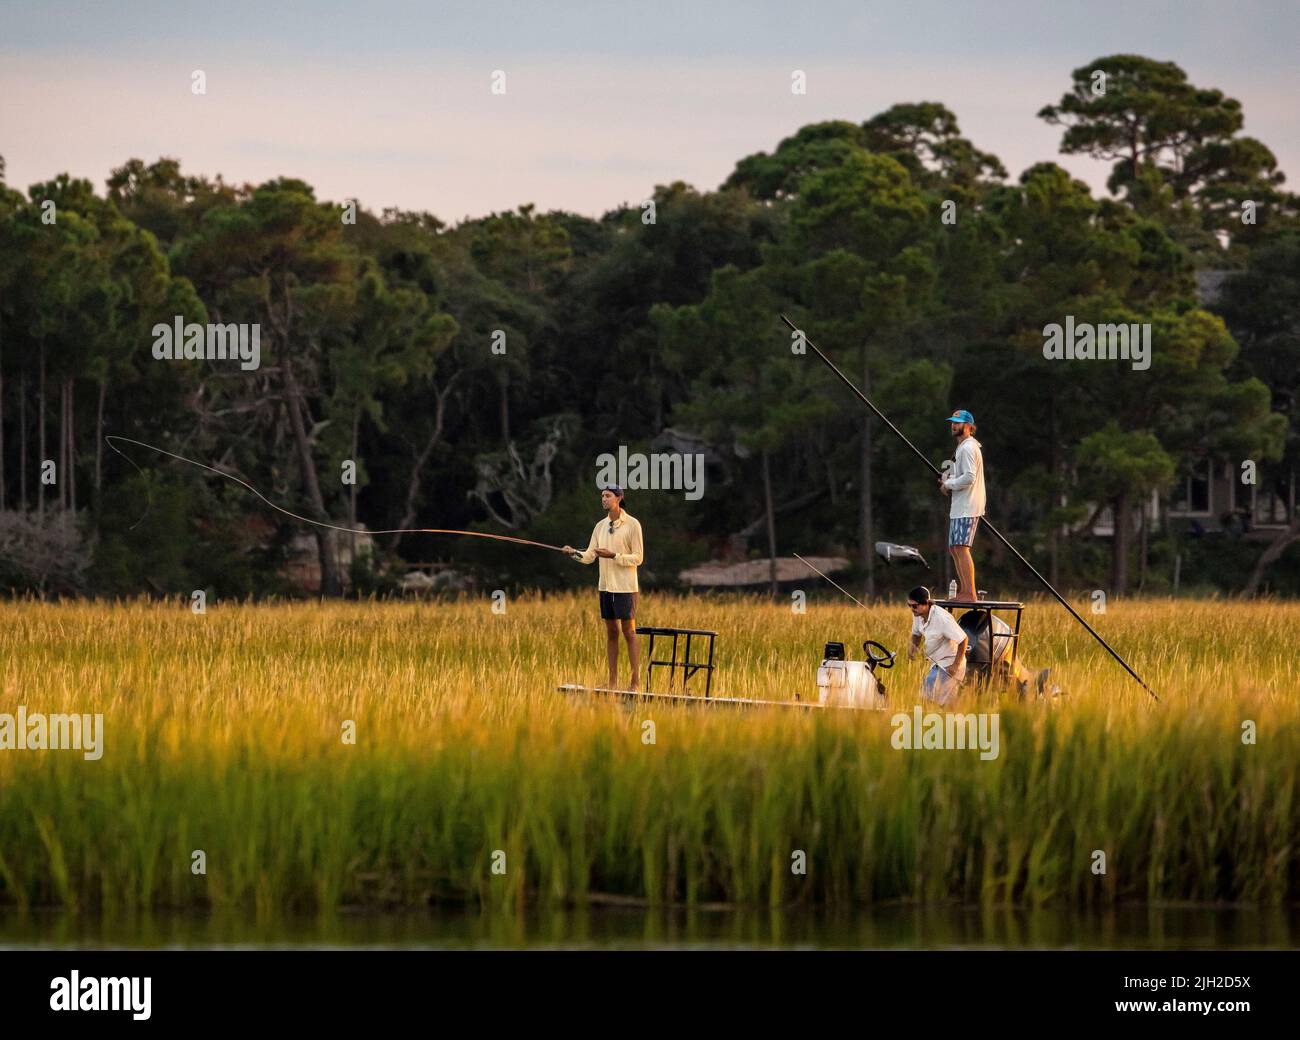 Flats fishing in lowcountry marshes near Charleston, SC. Stock Photo